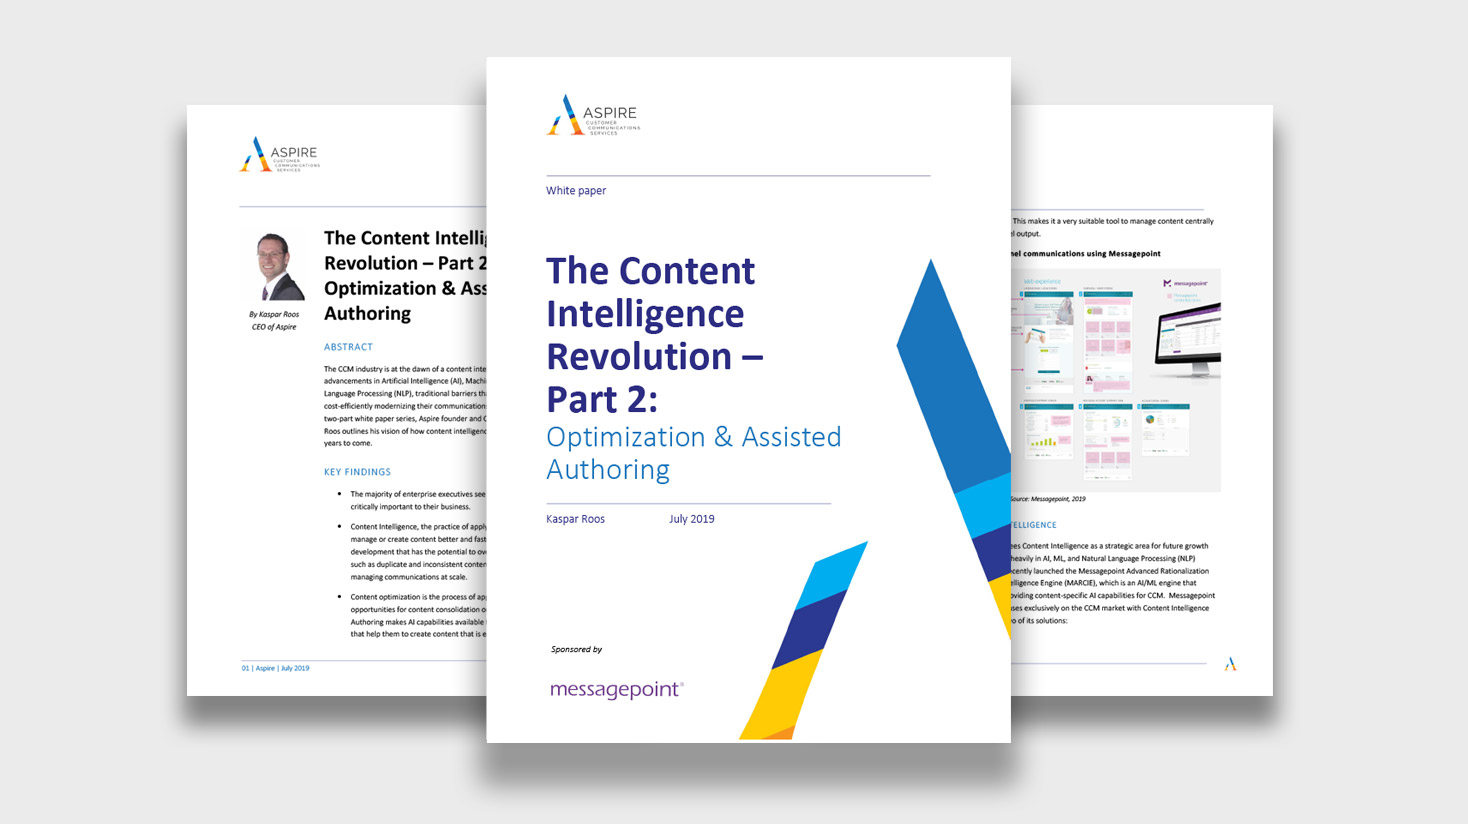 Whitepaper - The Content Intelligence Revolution Part 2, Optimization & Assisted Authoring